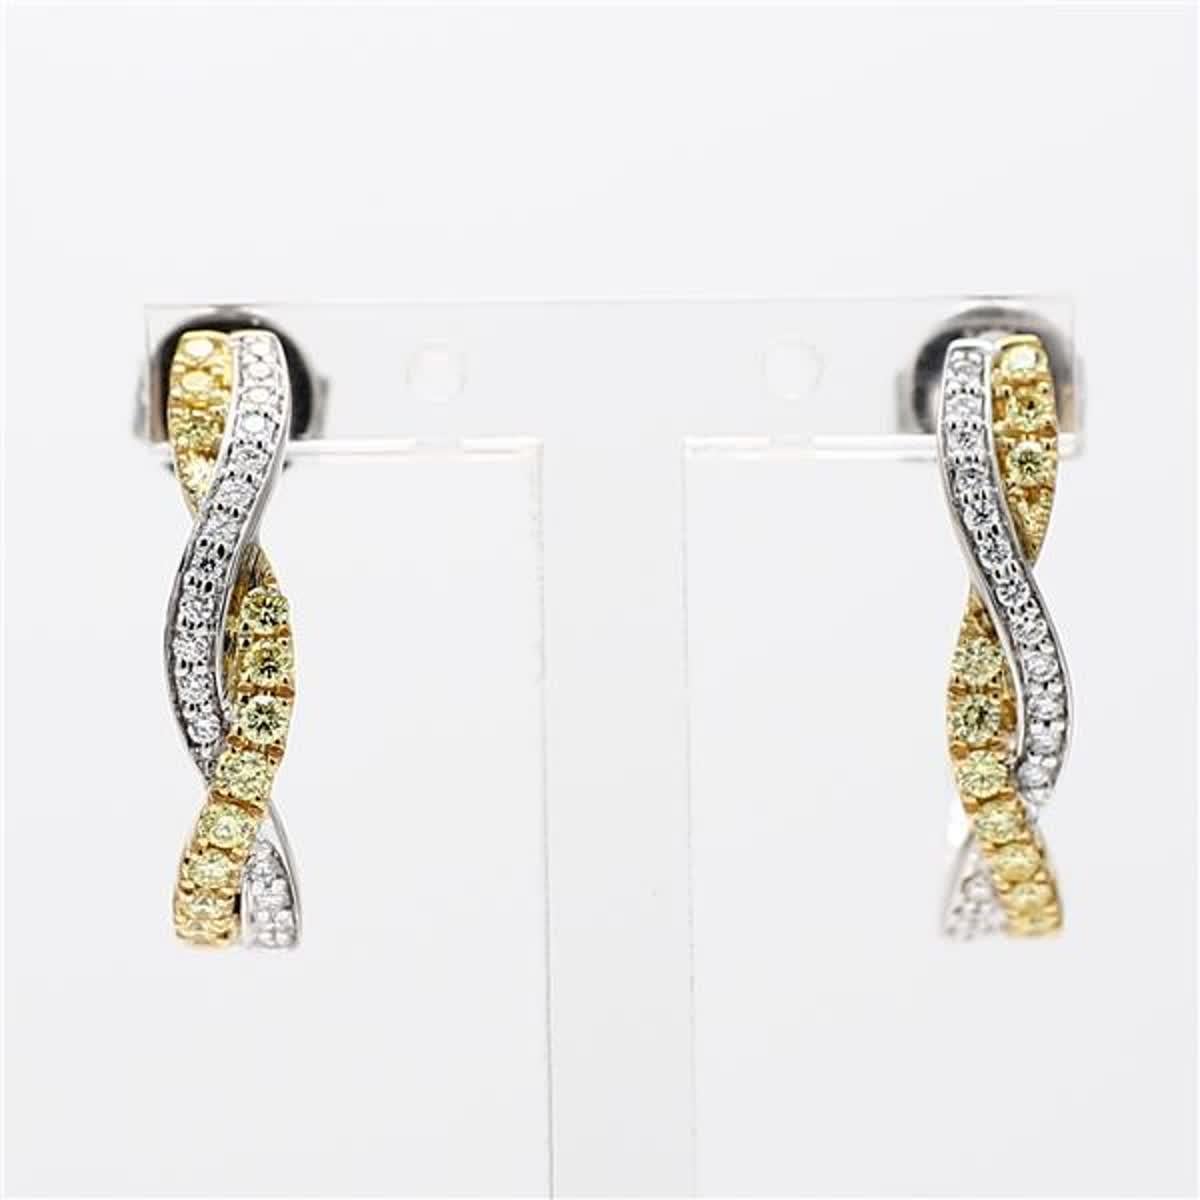 RareGemWorld's classic diamond earrings. Mounted in a beautiful 18K Yellow and White Gold setting with natural round cut yellow diamonds. These earrings include both natural round yellow diamond melee and natural round white diamond melee in a